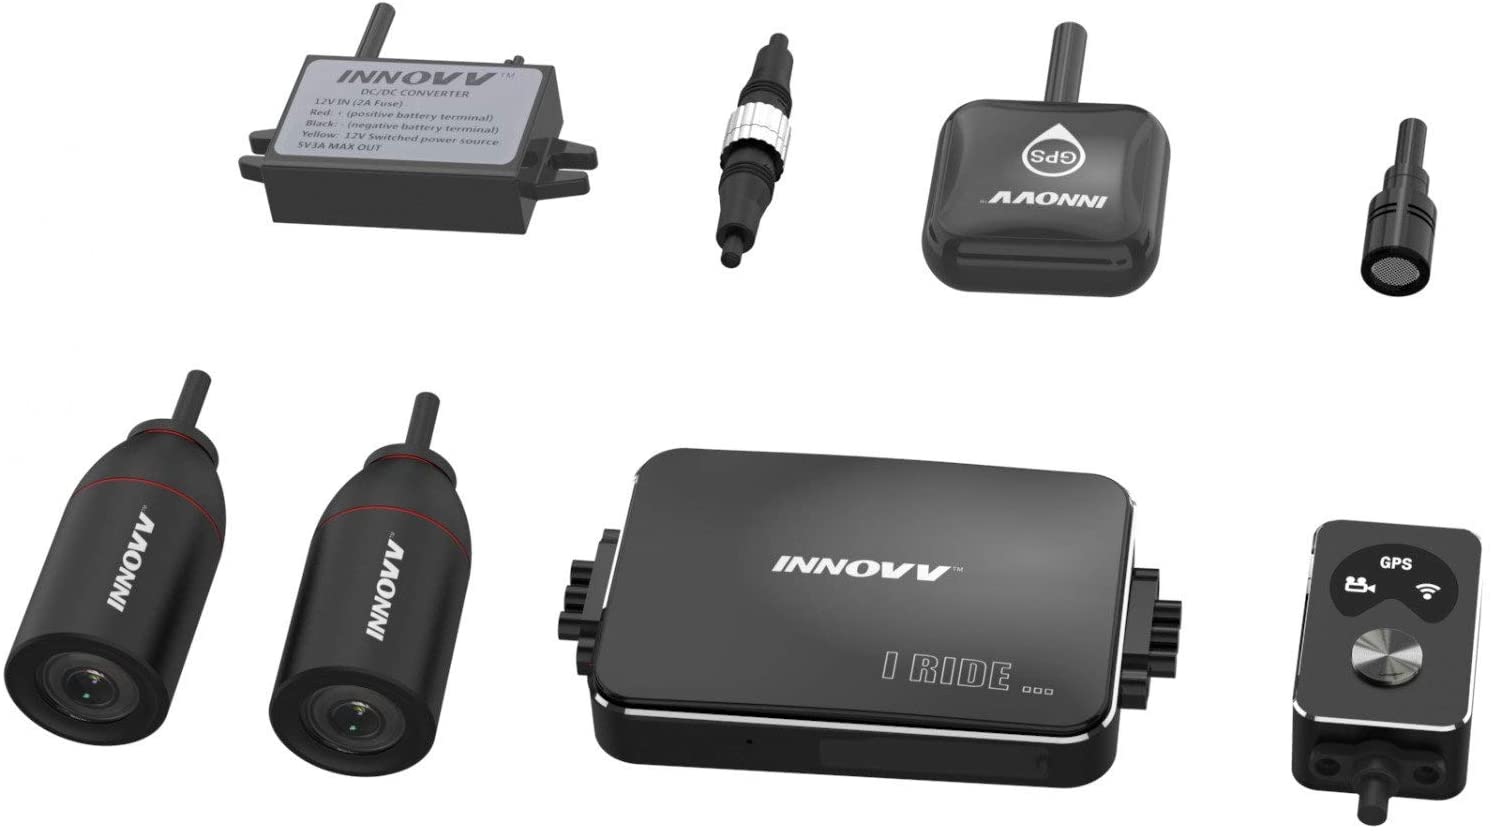 INNOVV K3 Dual Channel Motorcyle Motocam with WiFi, GPS and Parking Mode (256GB)